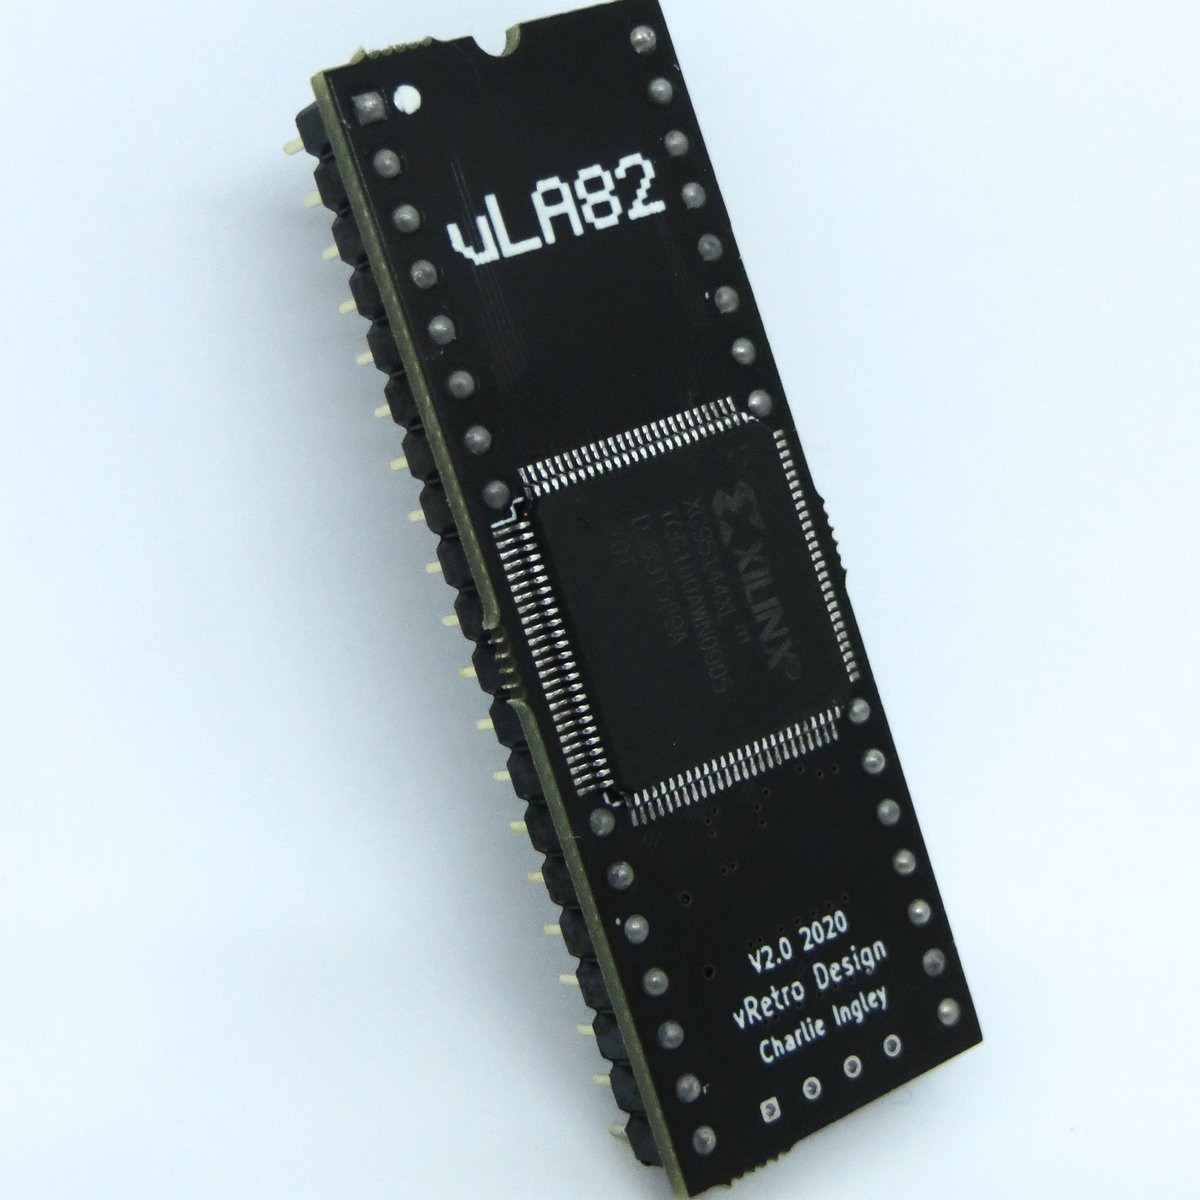 vLA82 - Spectrum 48K ULA replacement from Charlie Ingley on Tindie